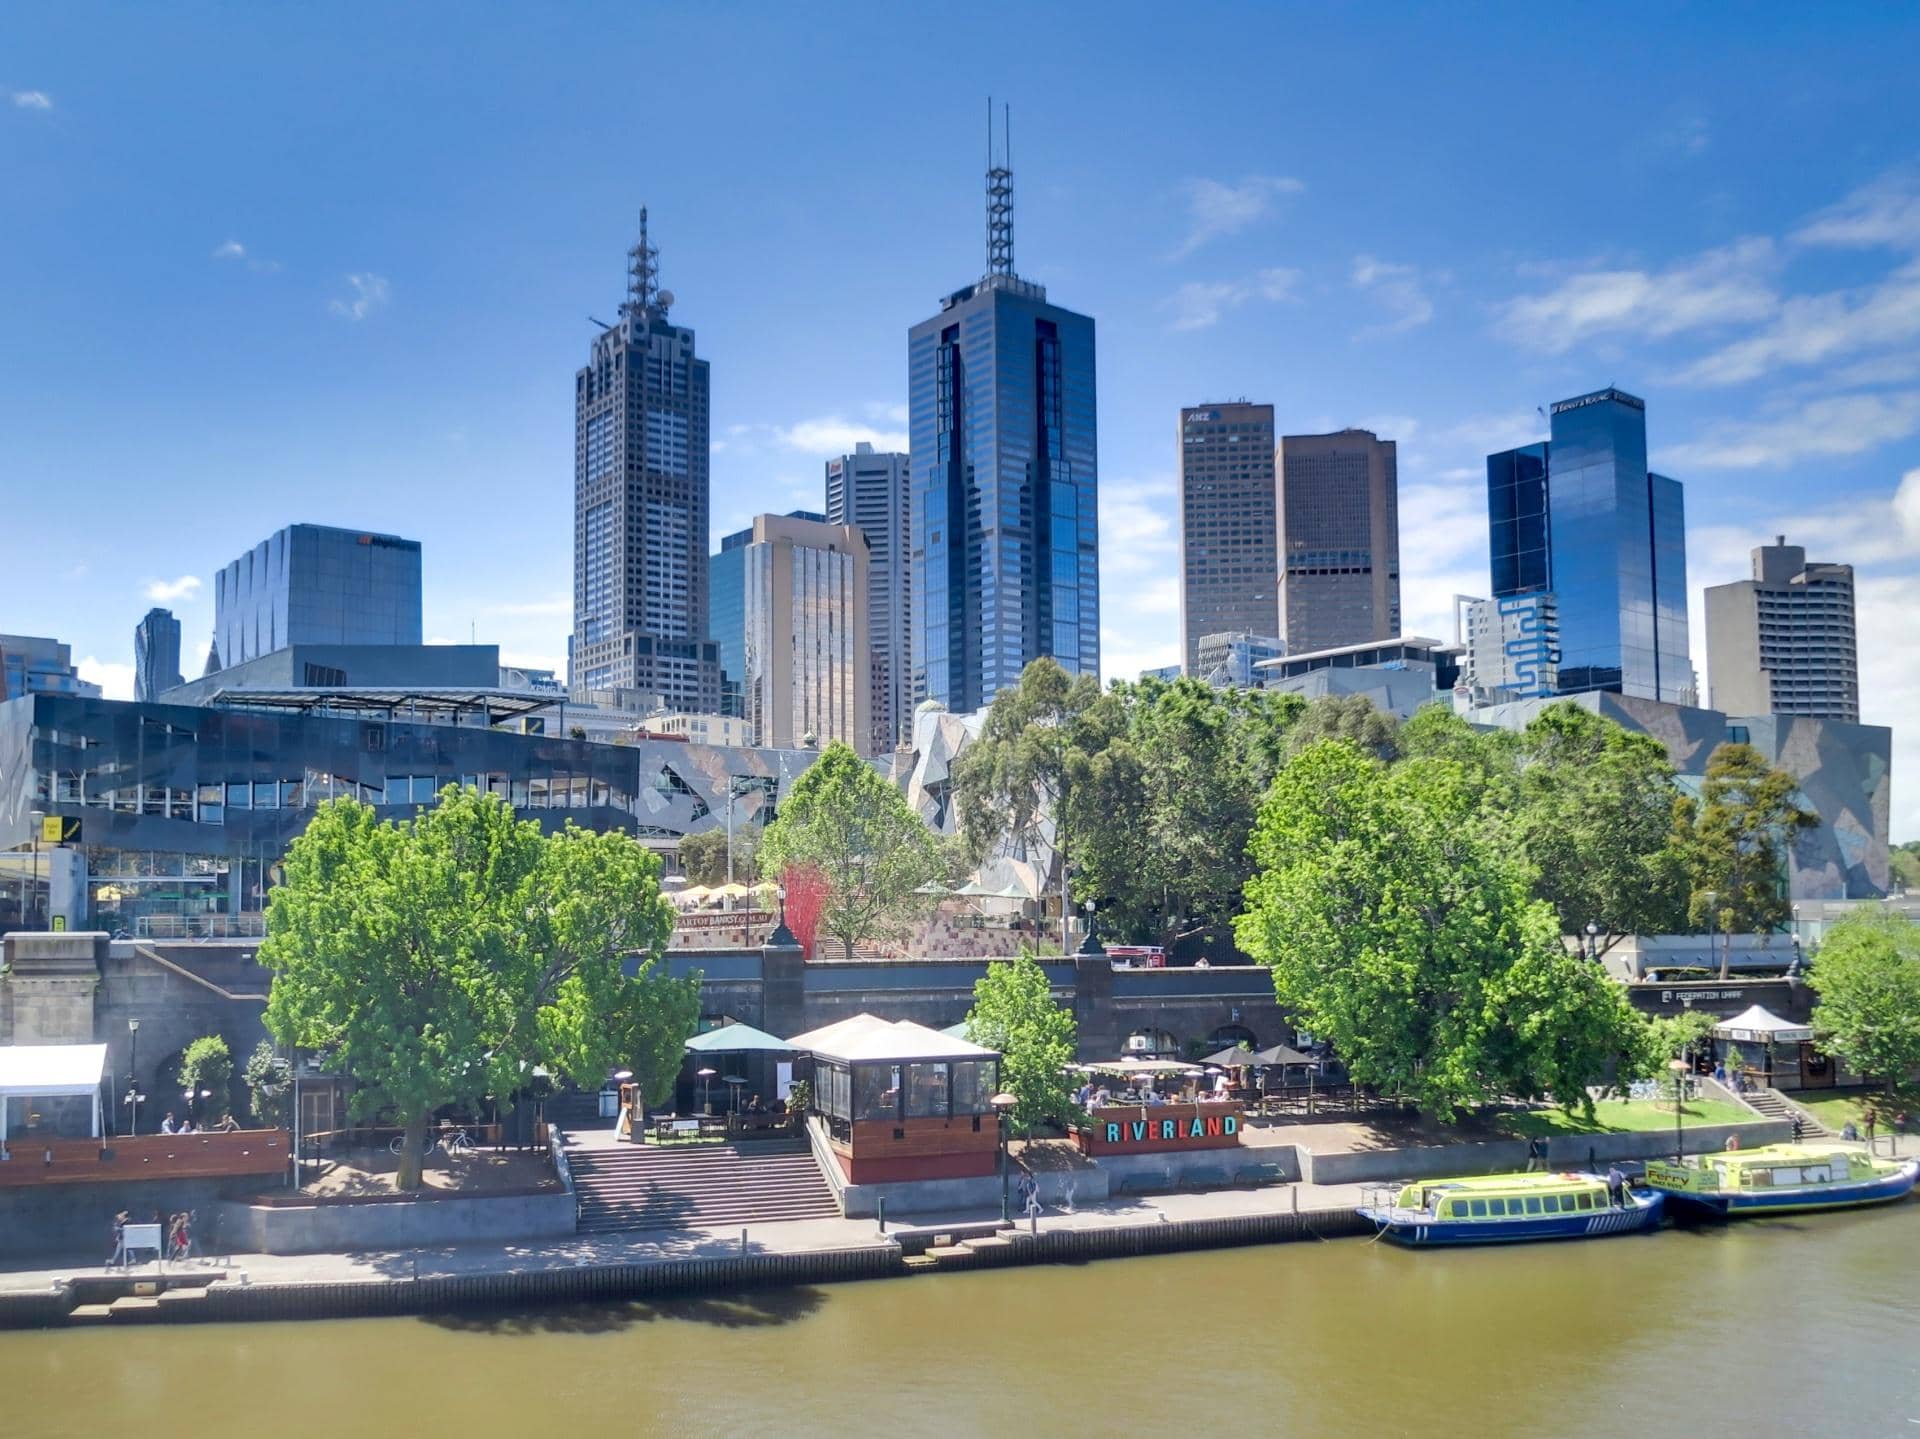 Melbourne is the most livable city in Australia’s otherwise sweltering hellscape.